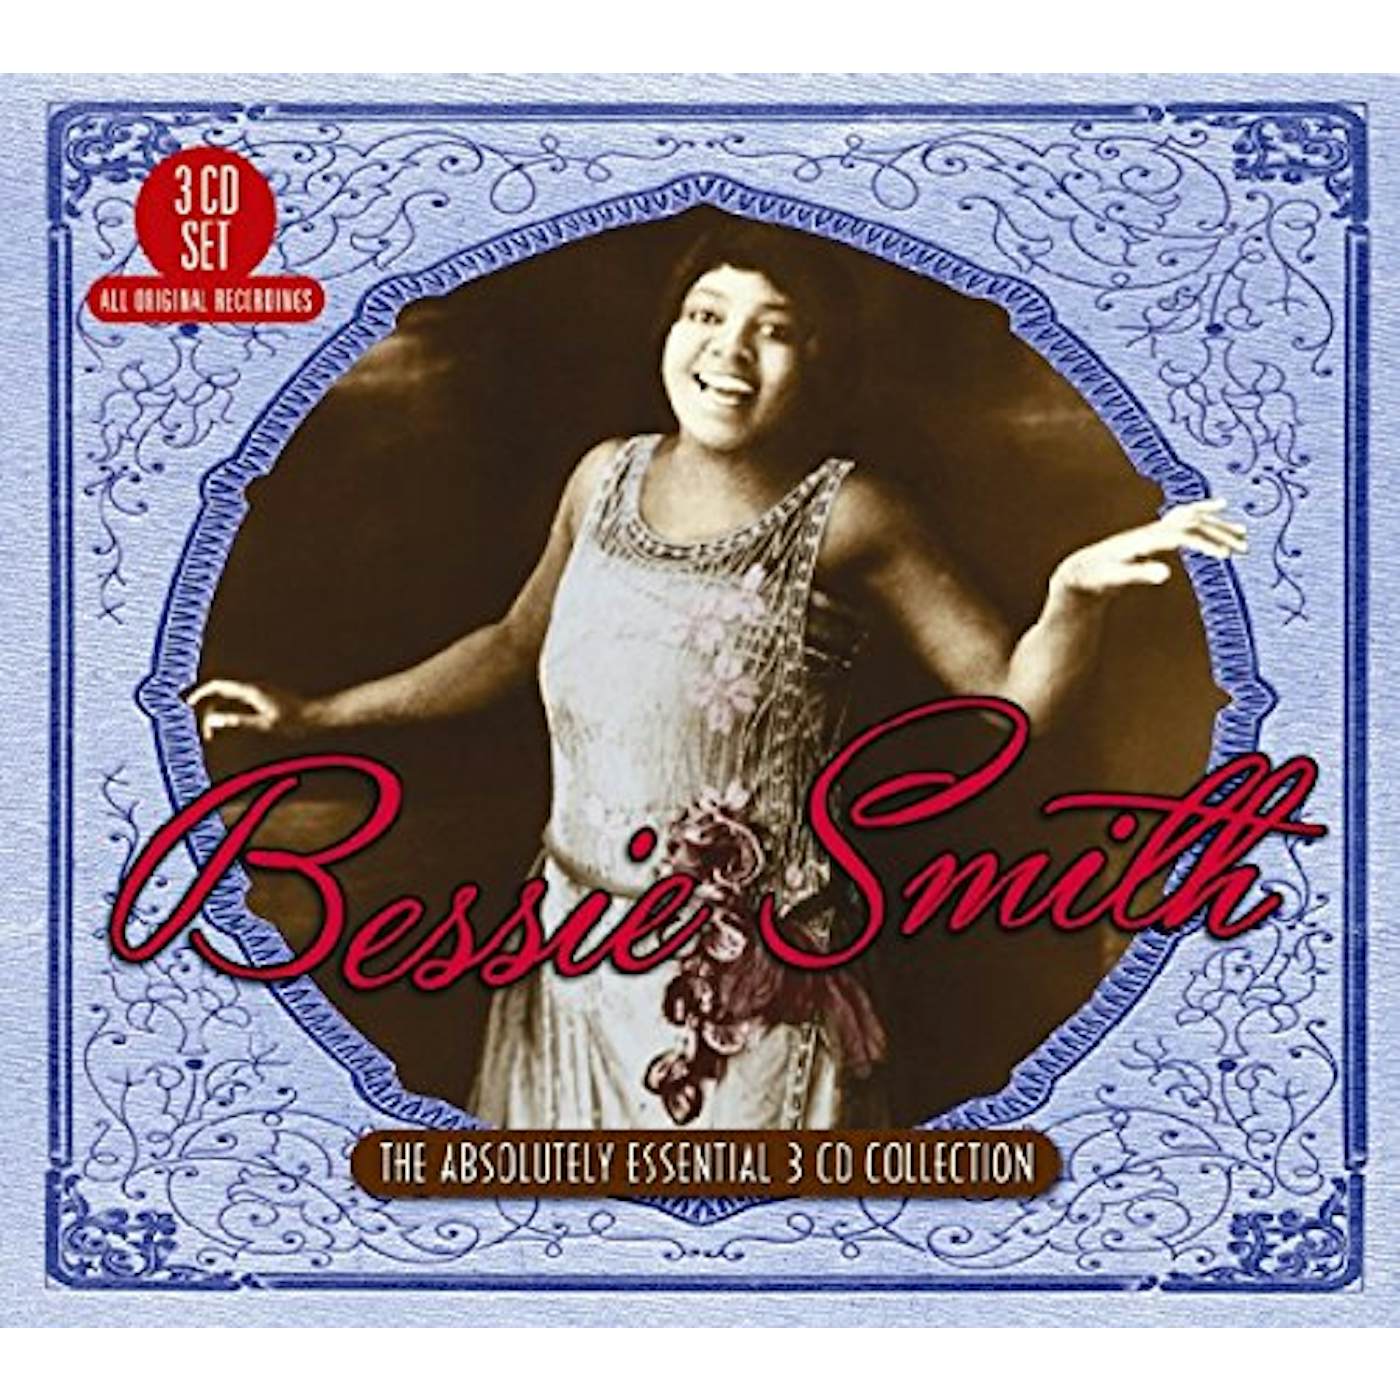 Bessie Smith ABSOLUTELY ESSENTIAL COLLECTION CD